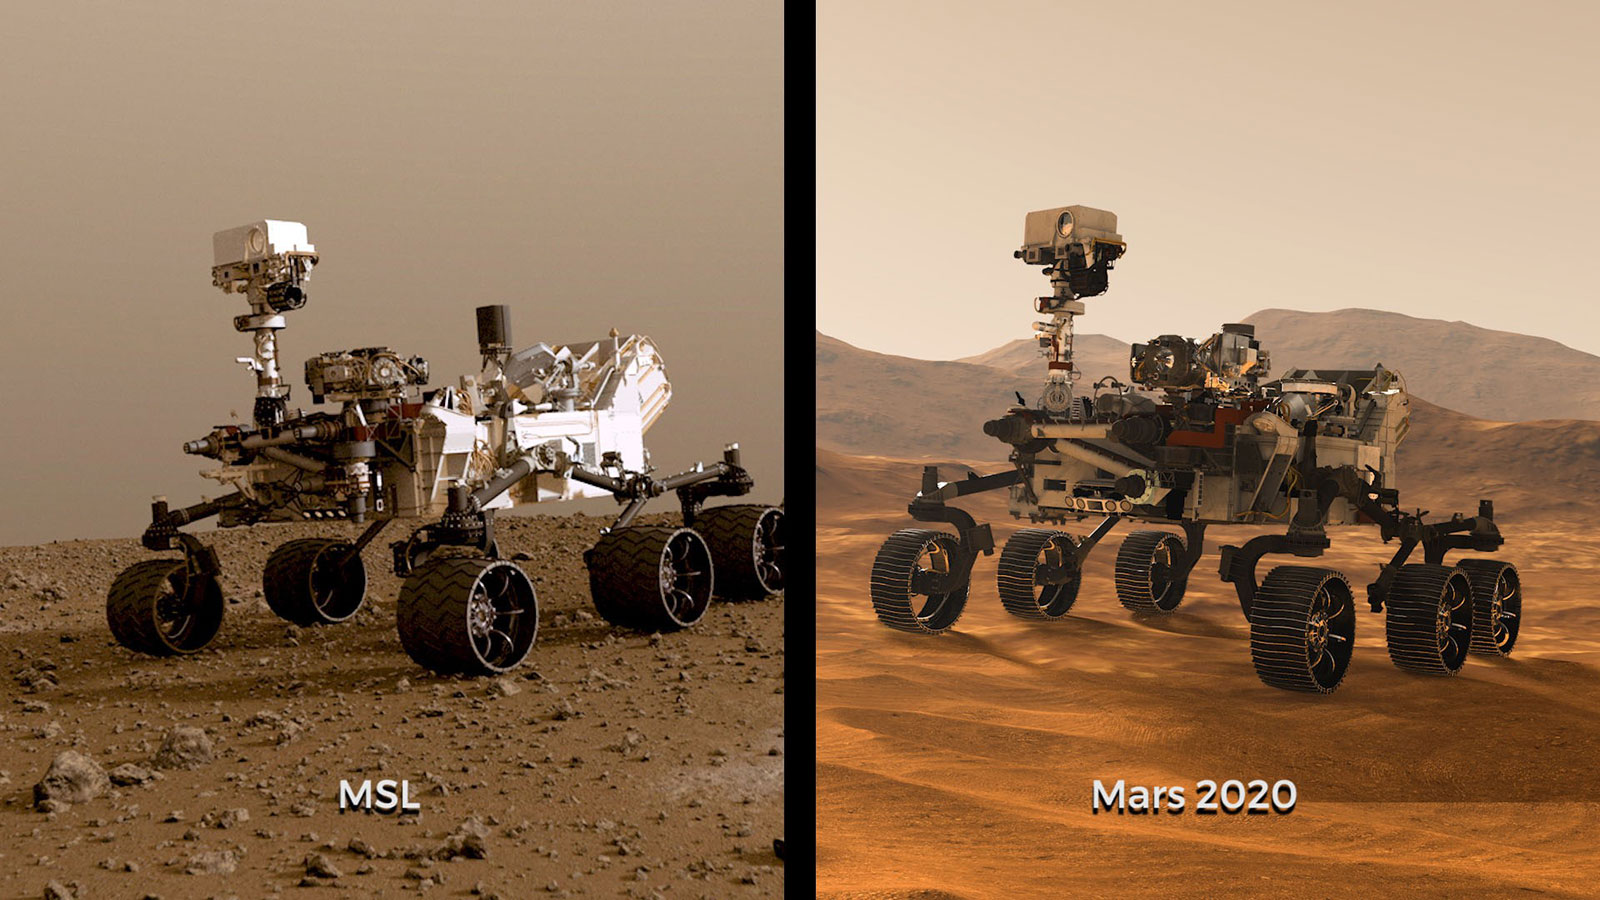 Illustrations of NASA's Curiosity and Mars 2020 rovers